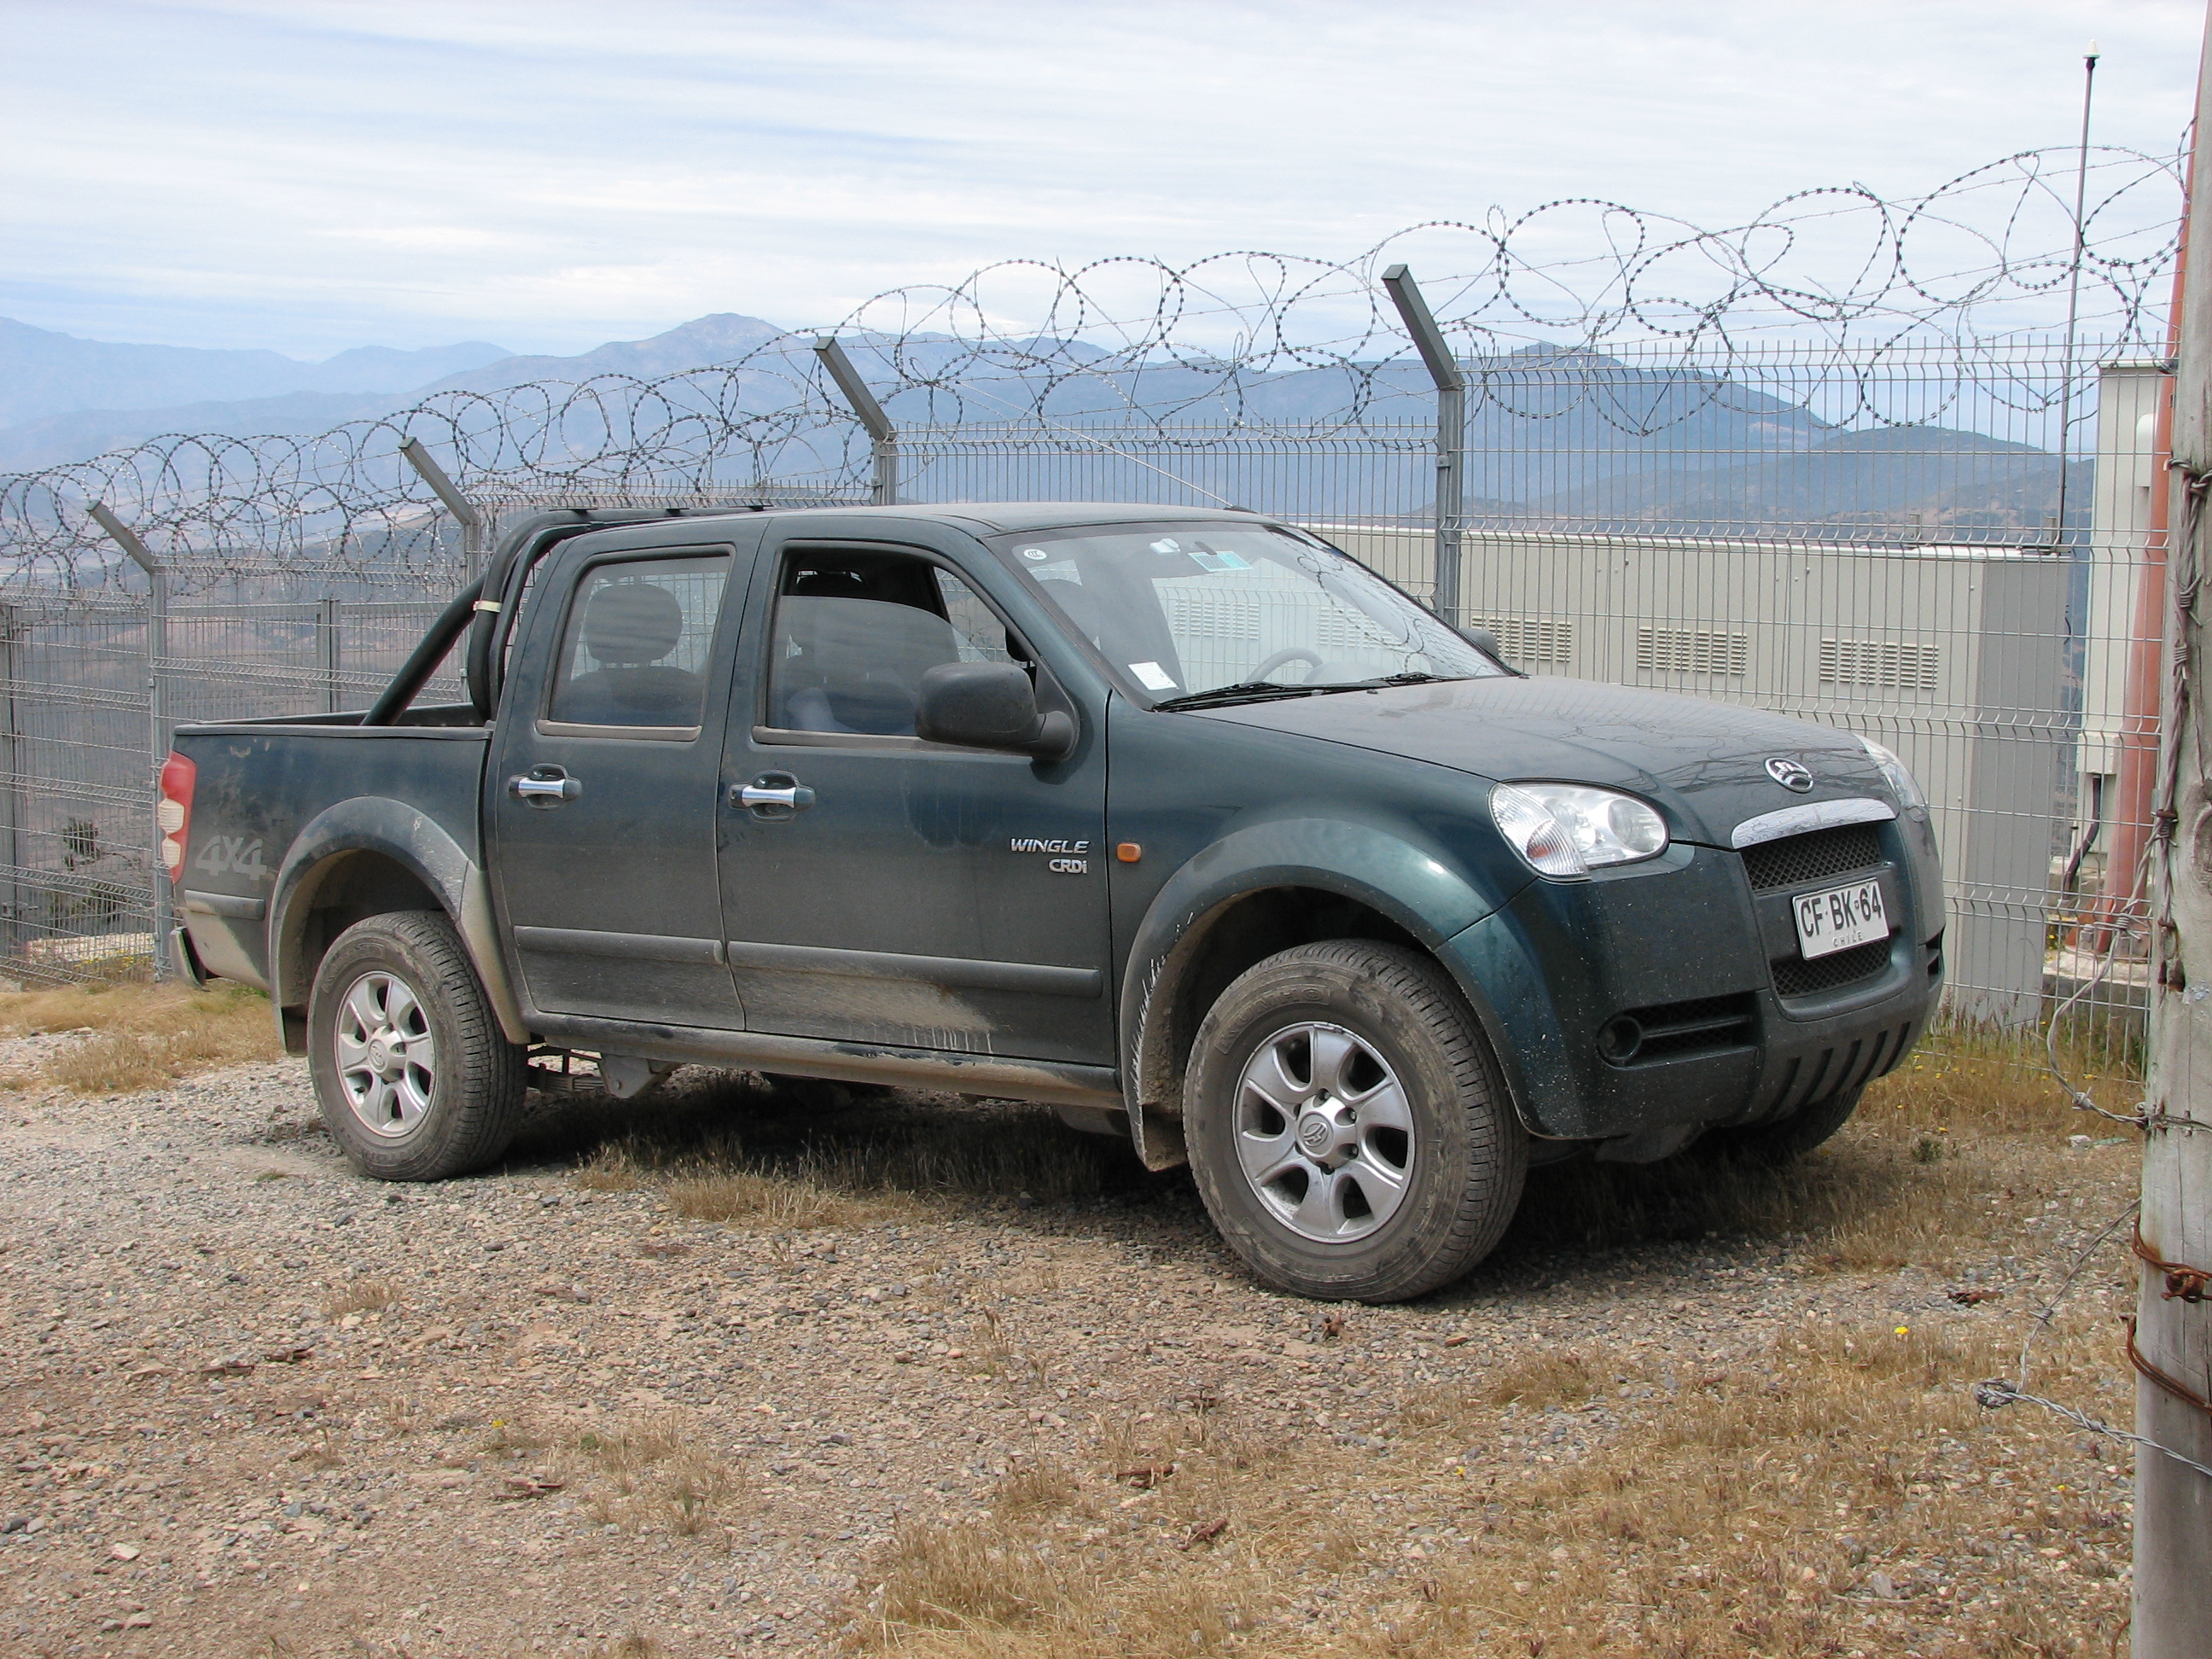 Great Wall Wingle 4x4 Photo Gallery: Photo #05 out of 12, Image ...